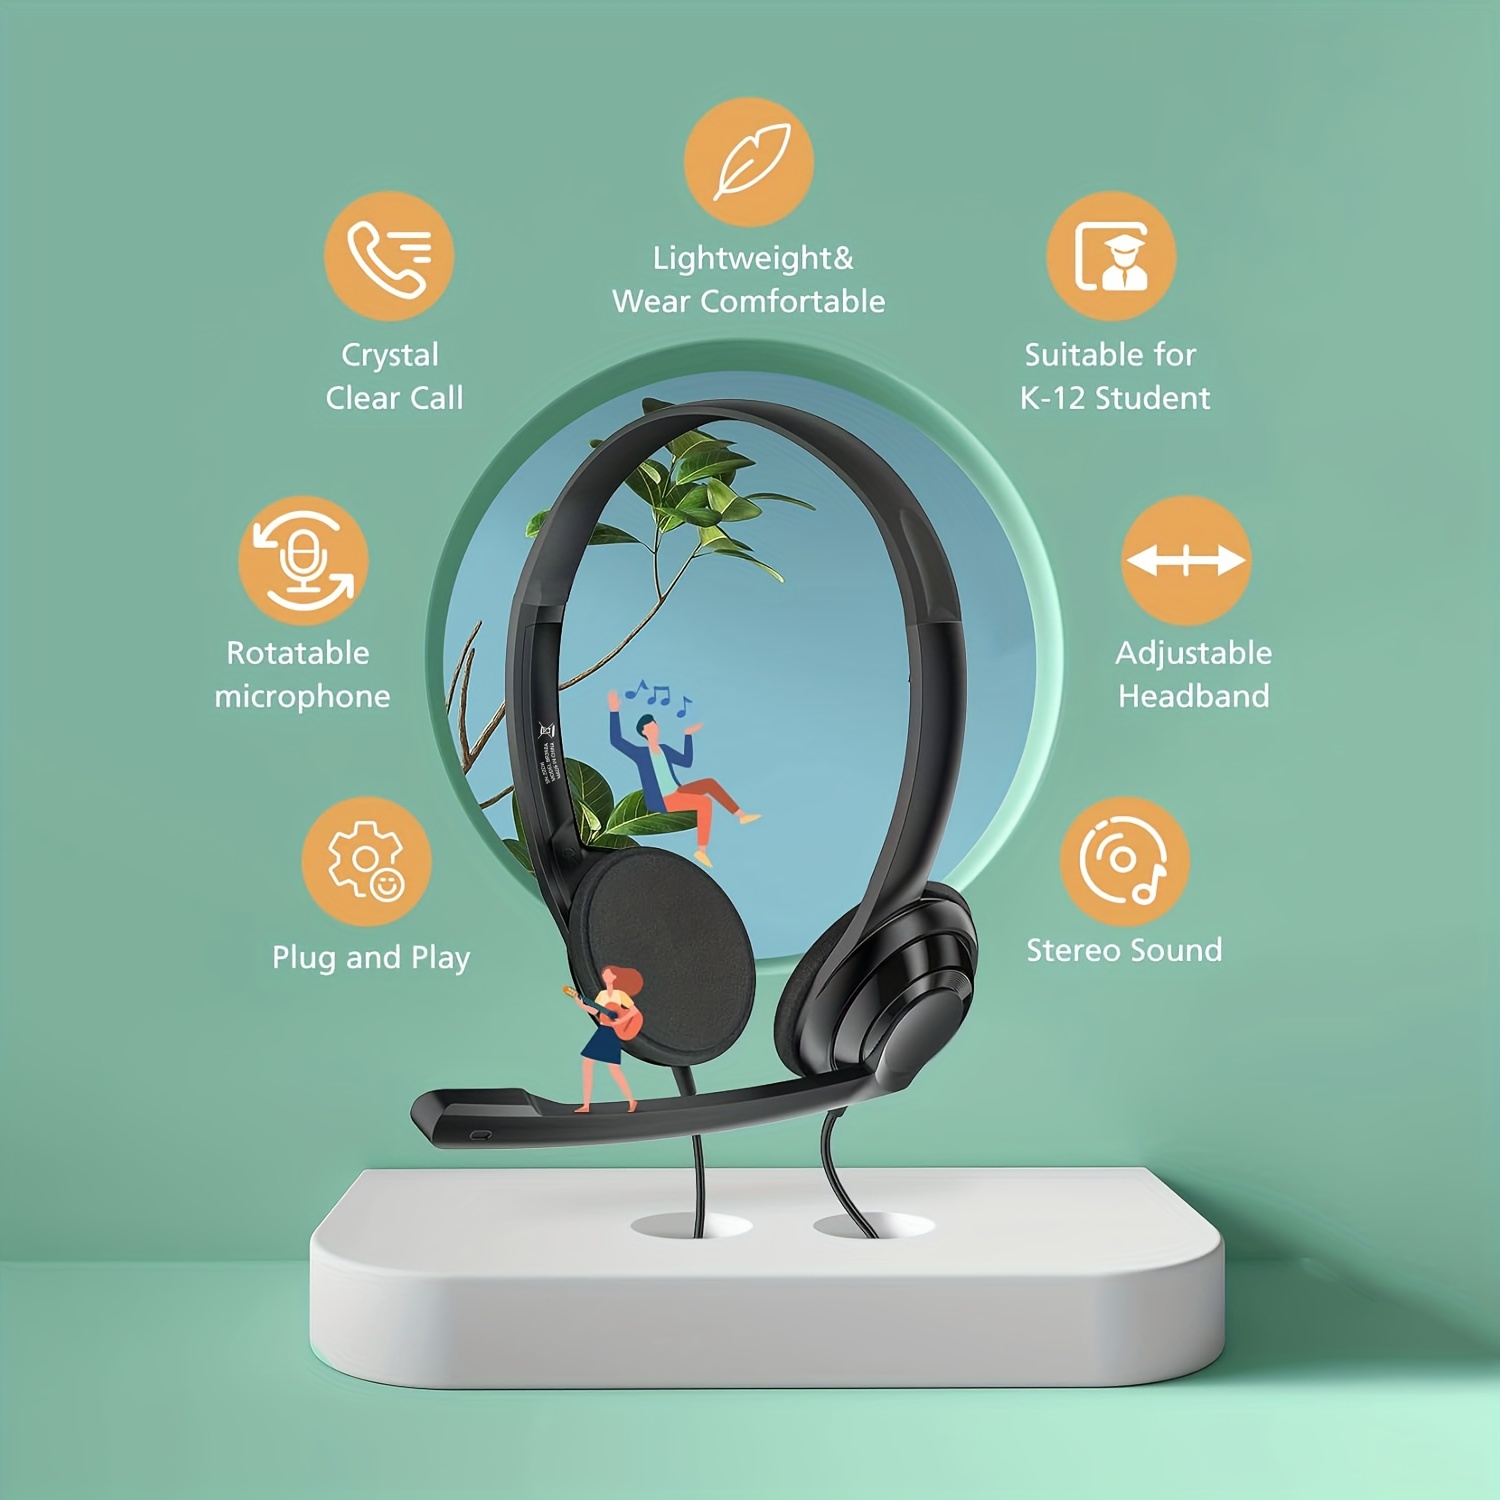 

3.5mm Wired Headset With Microphone For Pc - Lightweight, Noise-canceling Computer Headphones For Work, Office, School, And Meetings - Compatible With Laptops, Non-waterproof, Plastic Material